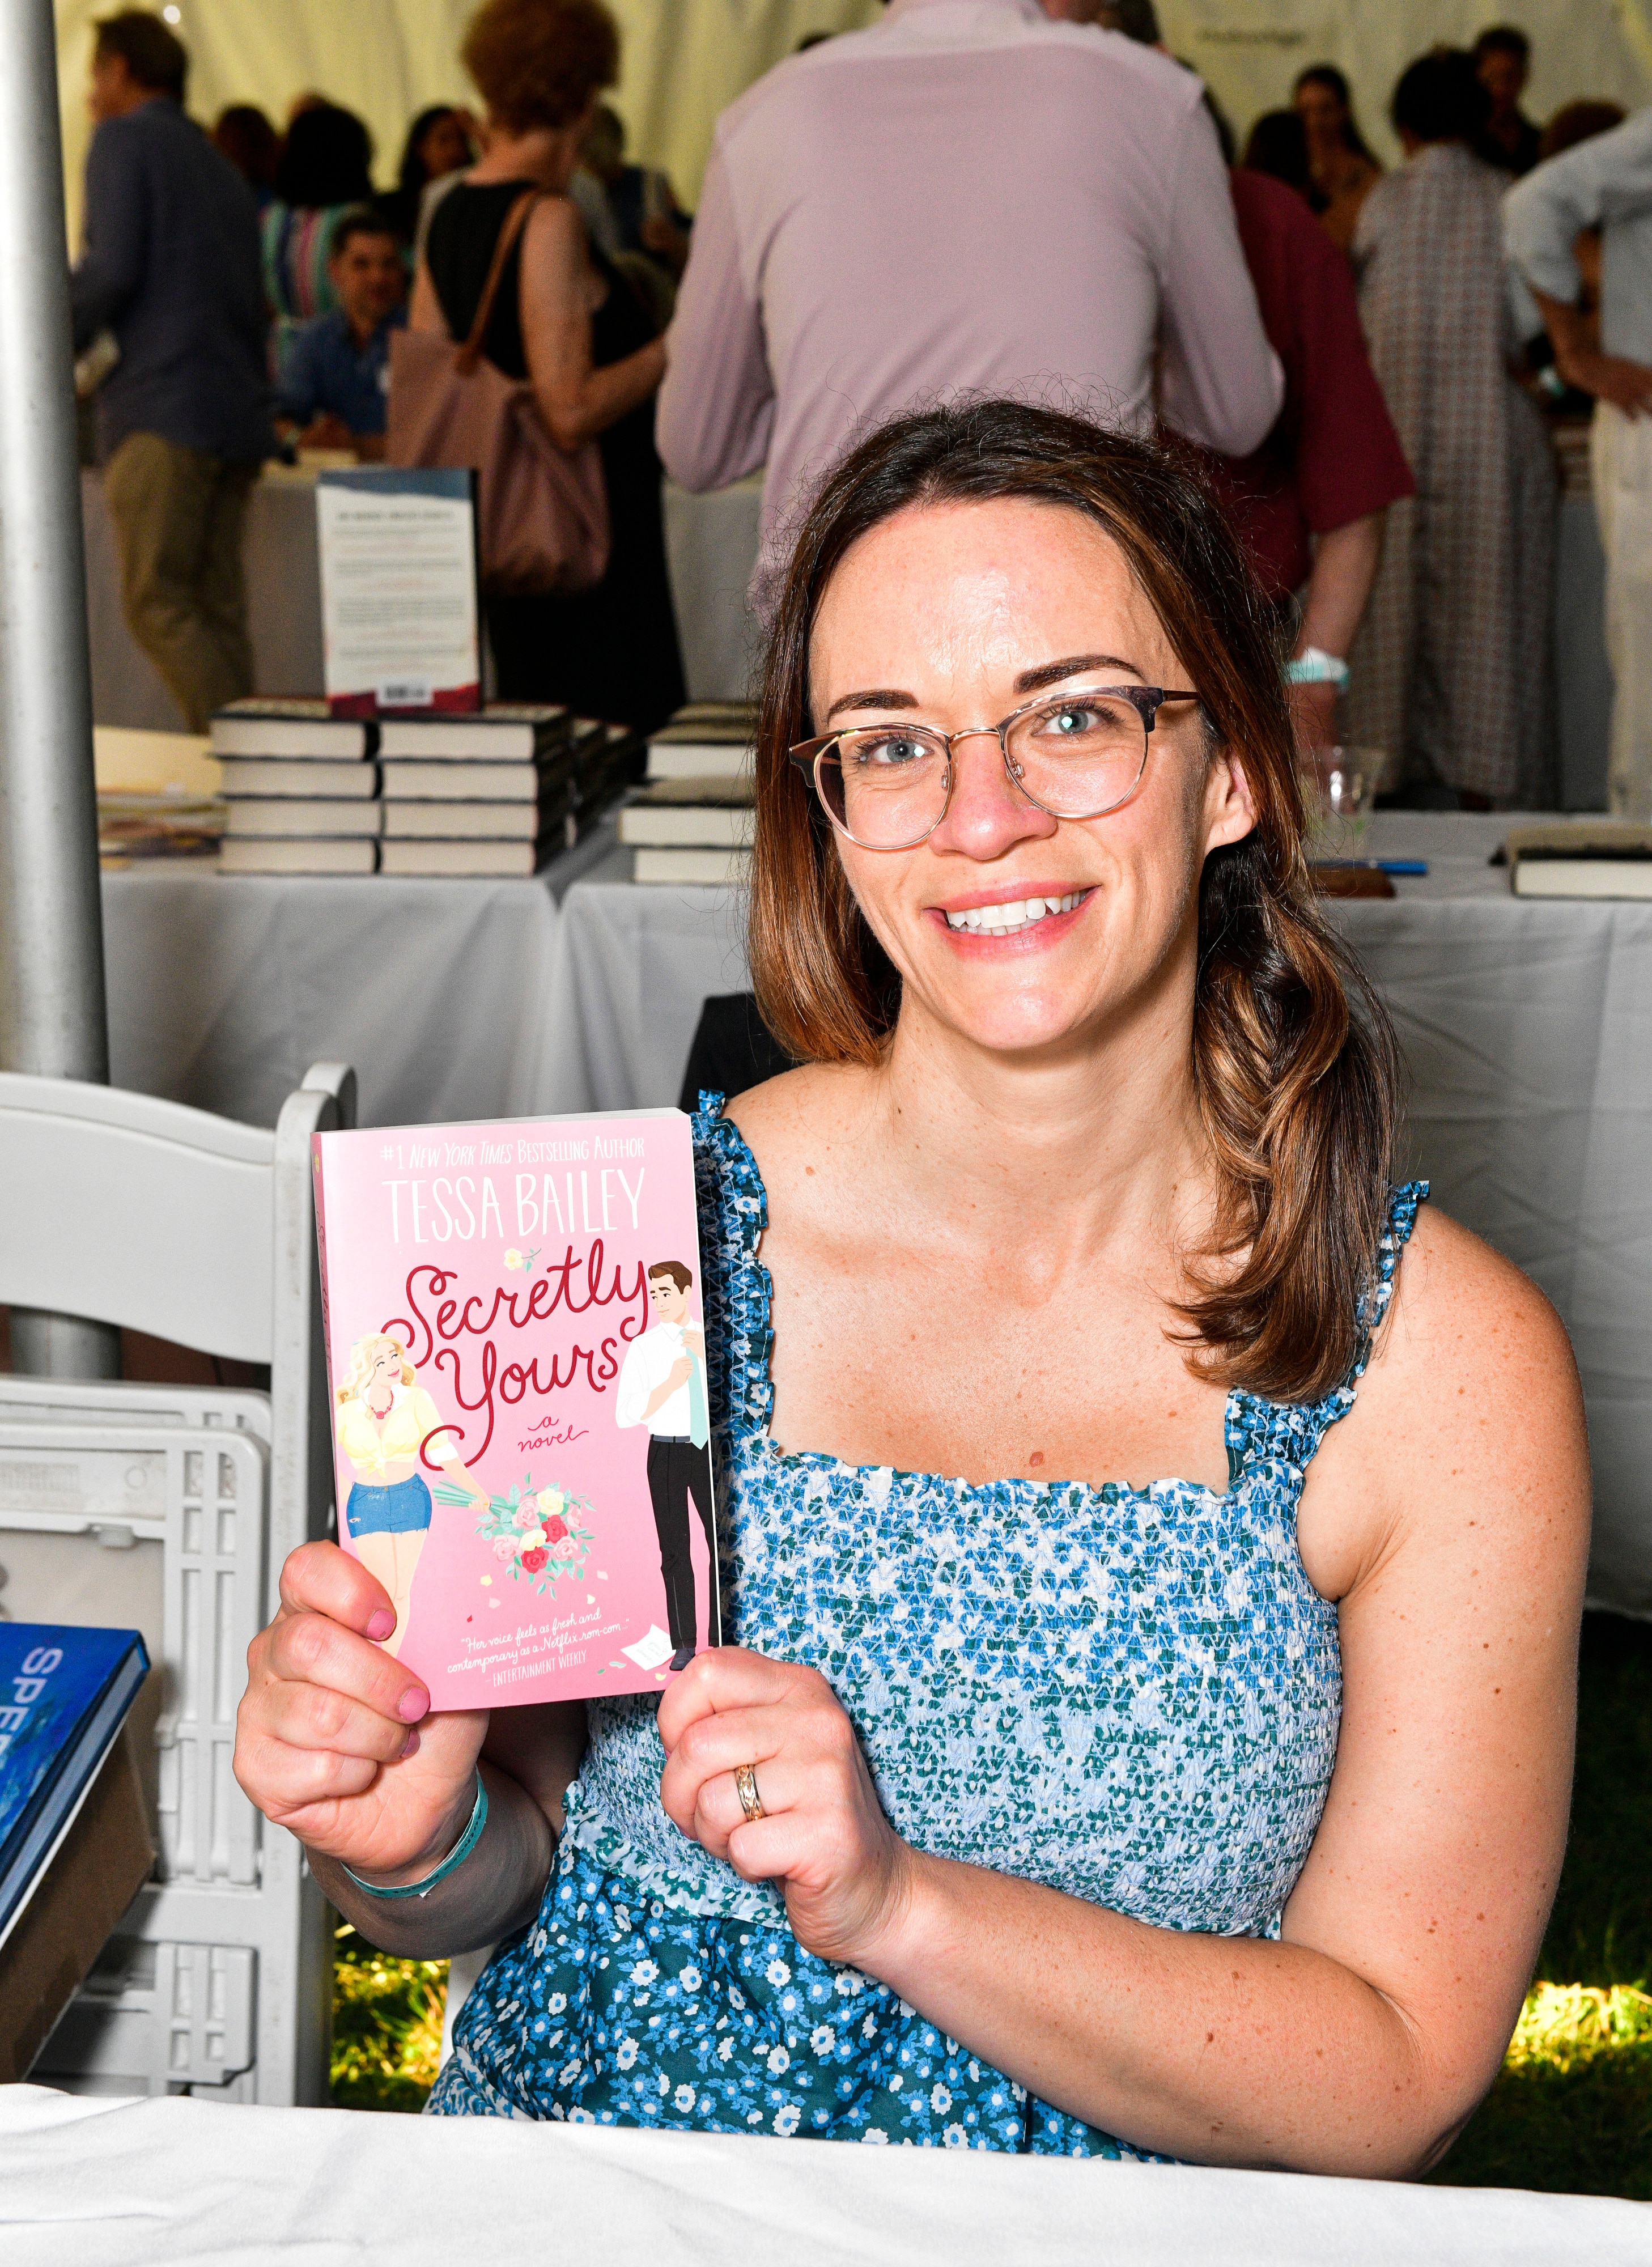 Tessa, who has brown hair and wears a blue dress and glasses, smiles as she holds up a pink romance novel.